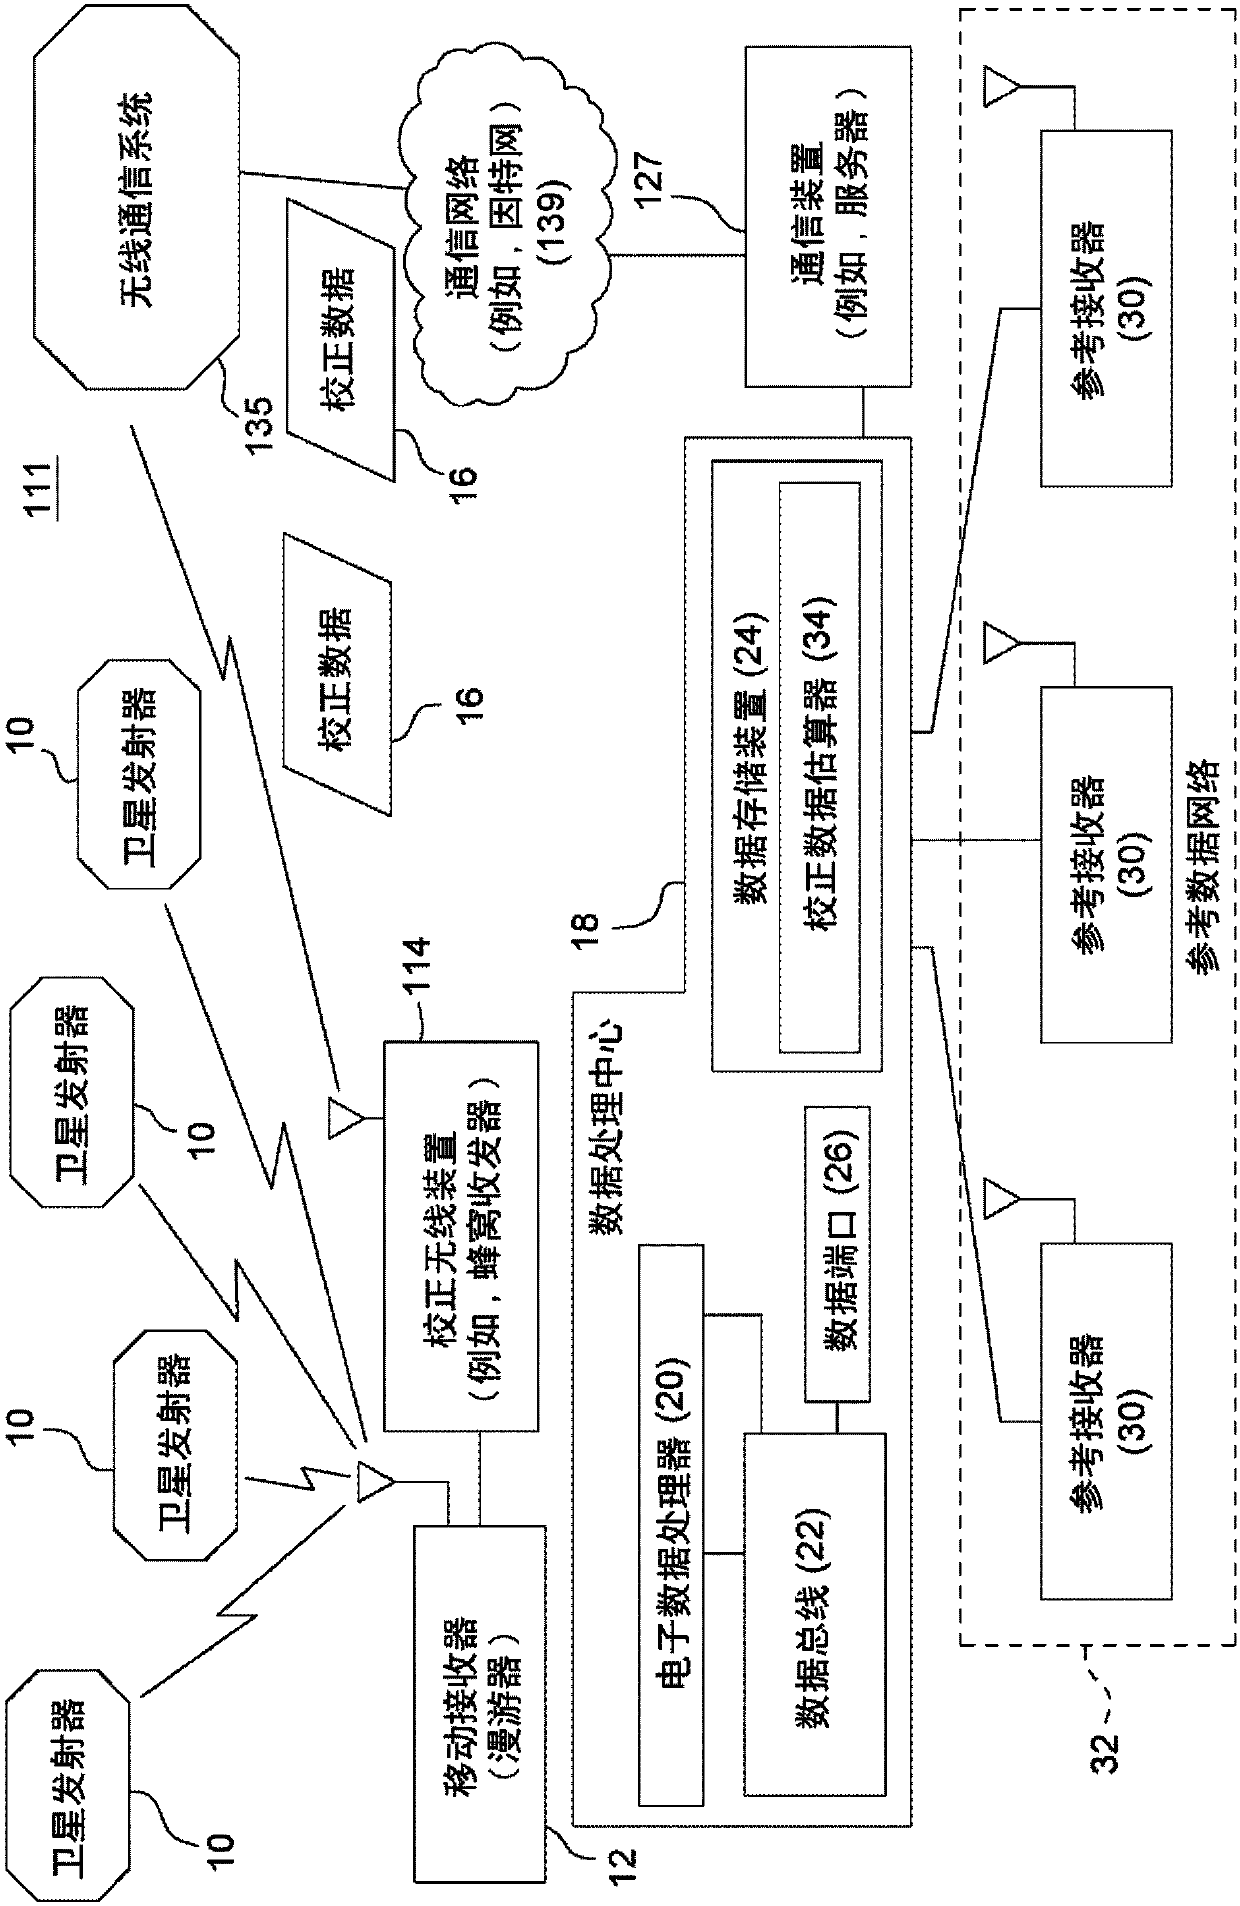 Satellite navigation receiver and method for switching between real-time kinematic mode and precise positioning mode